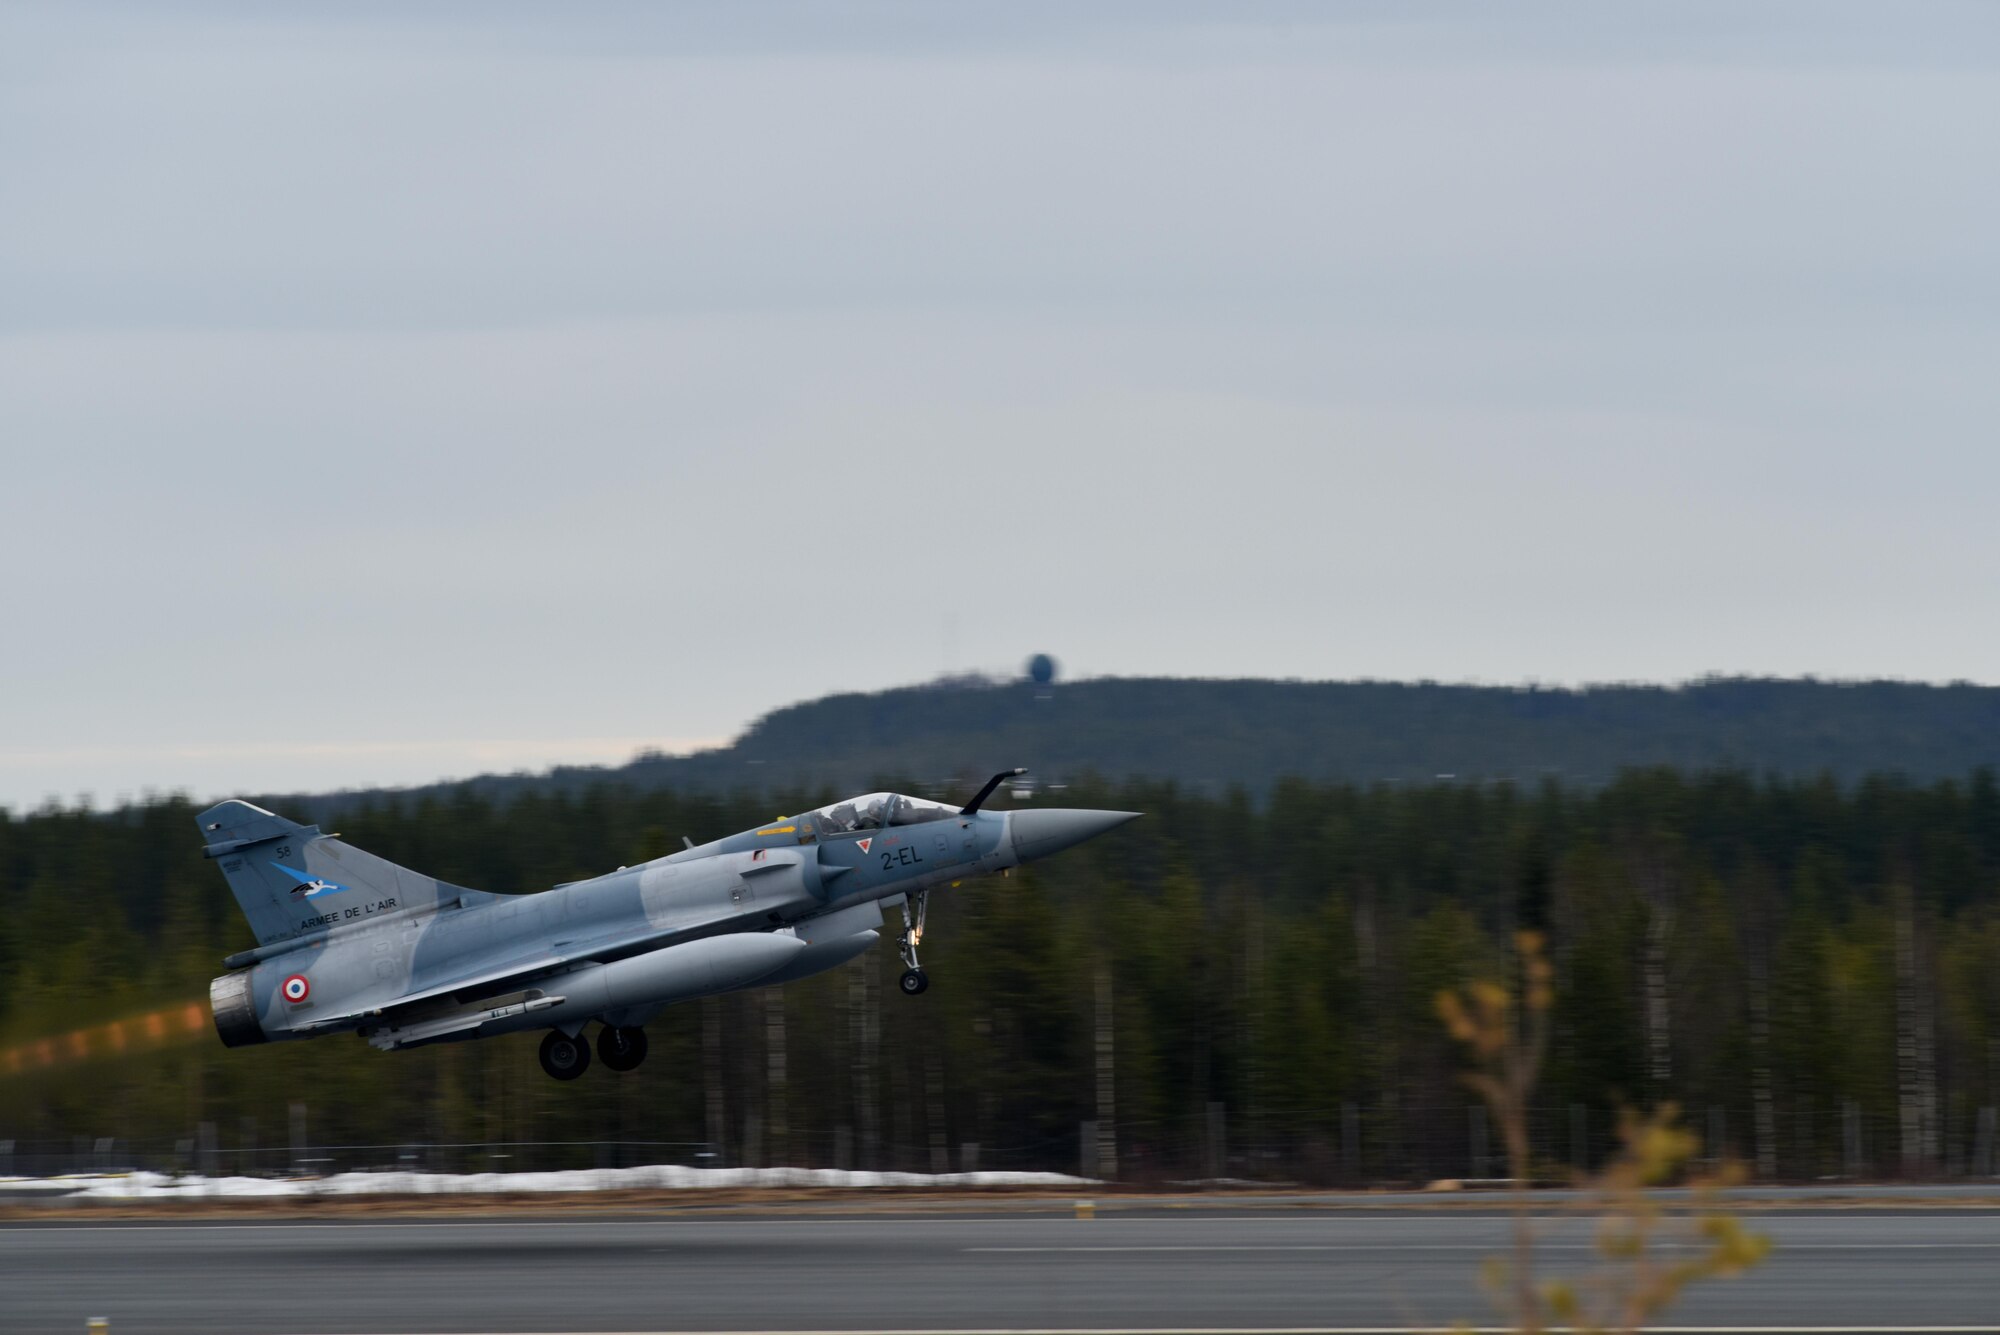 A French Mirage 2000 takes off at Rovaniemi Air Base, Finland, May 22, in support of Arctic Challenge 2017. Continued, realistic interoperability exercises, such as ACE 17, allow the U.S., allies and partner nations to build their expertise in the air. (U.S. Air Force photo/Airman 1st Class Abby L. Finkel)